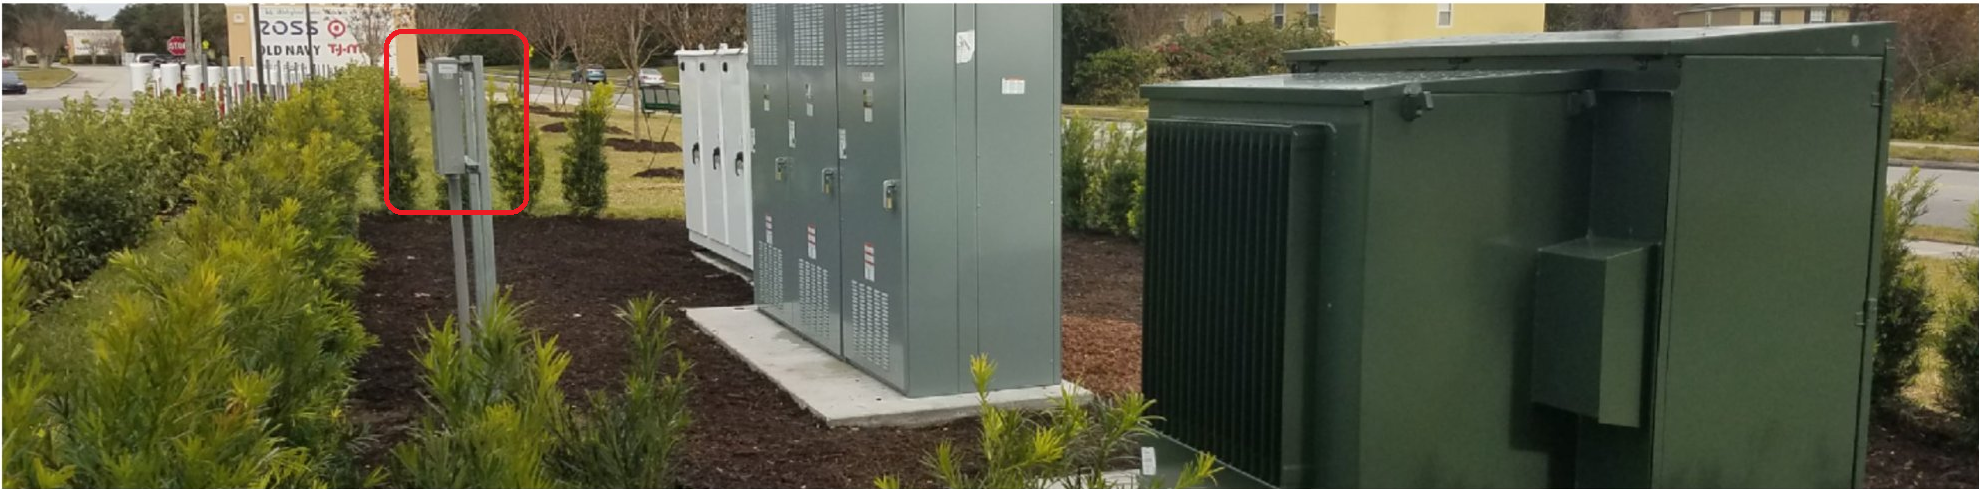 Union Park Supercharger almost operational.png